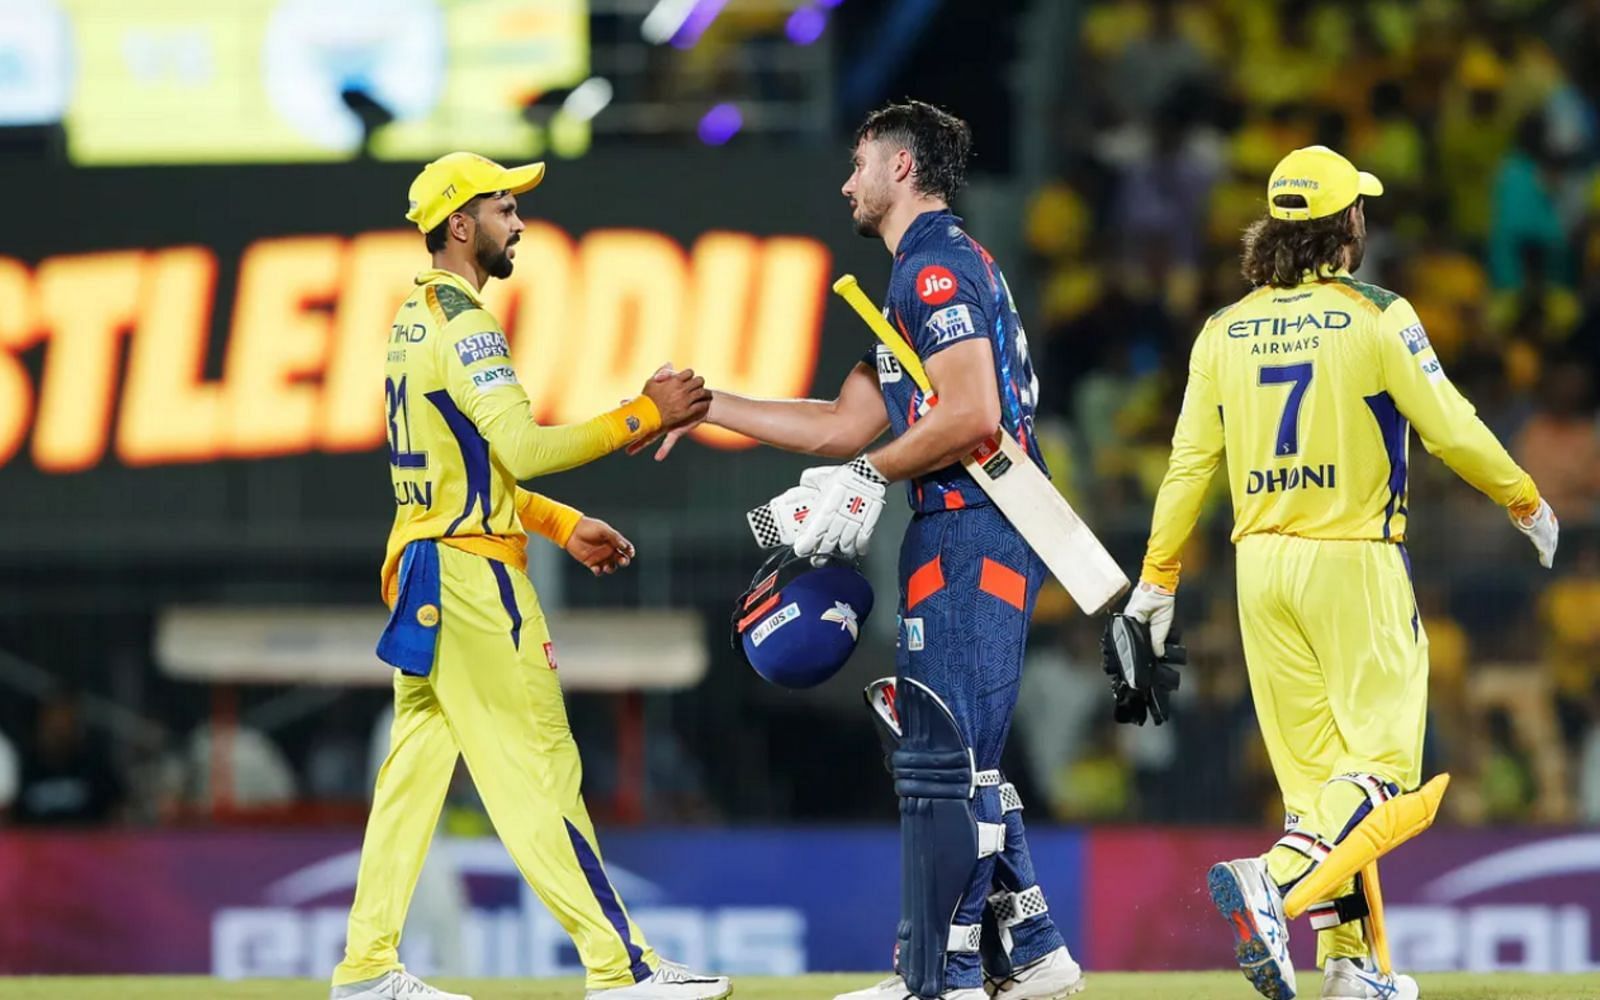 LSG chased down the total of 211 against CSK on Tuesday (Image:BCCI/IPL)